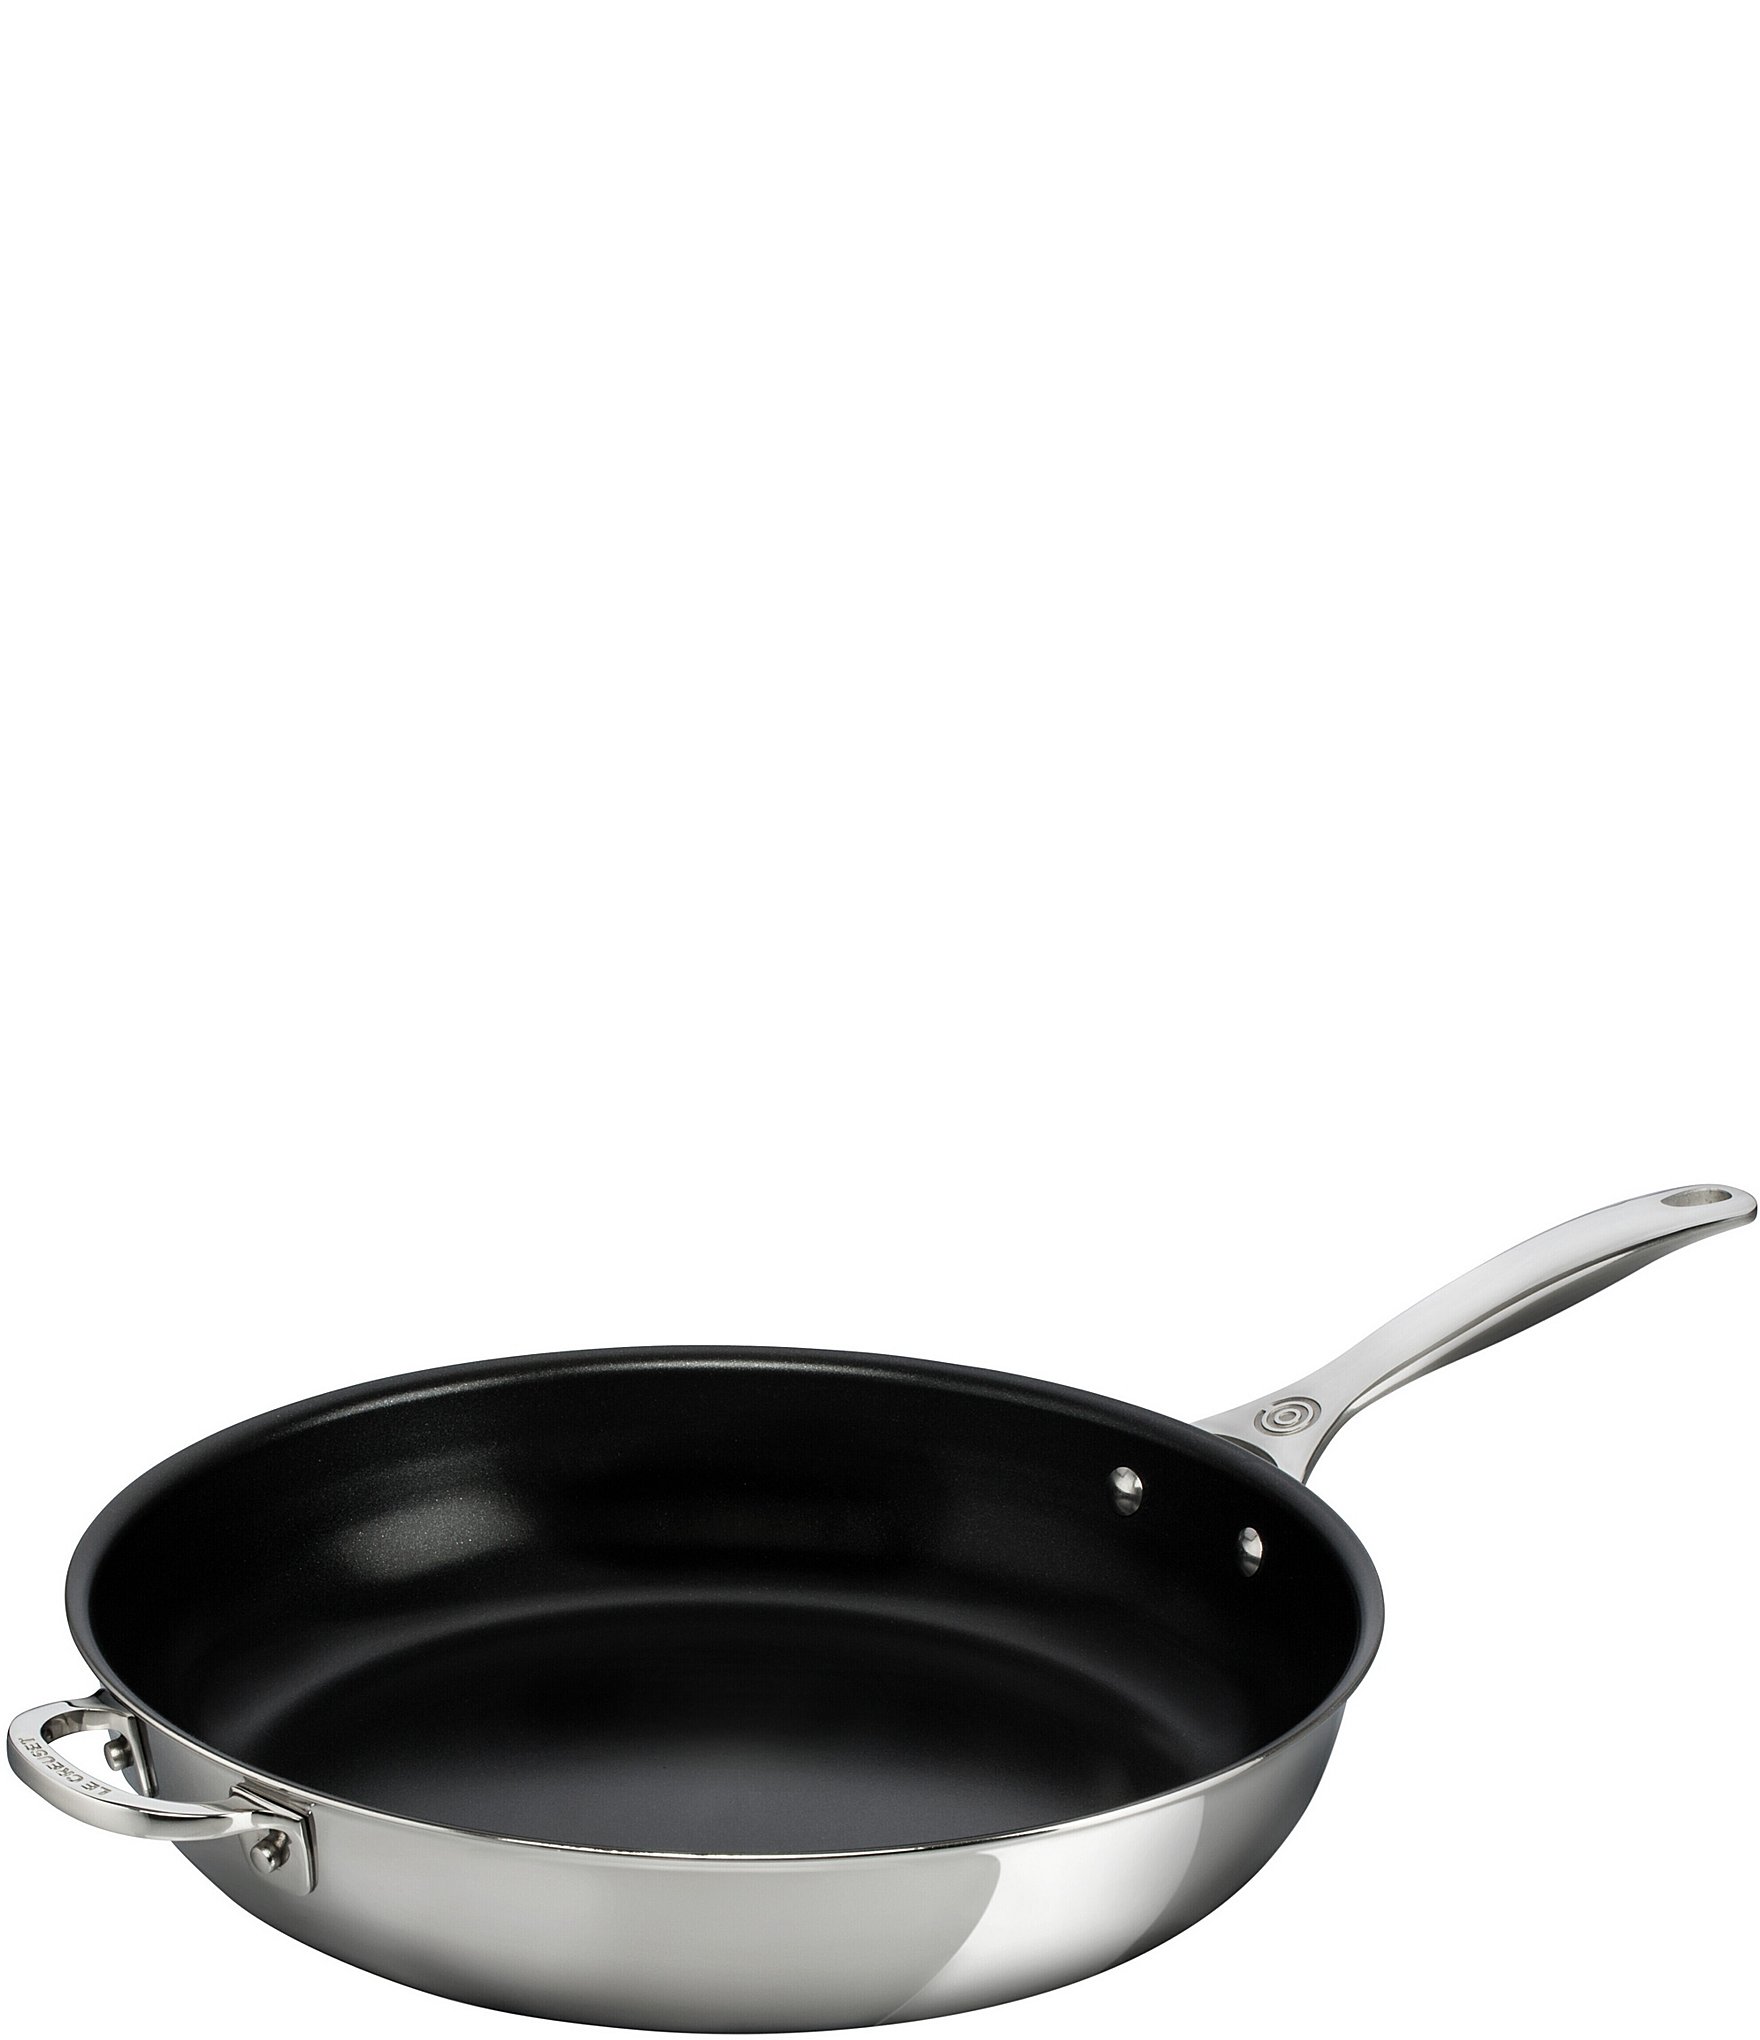 https://dimg.dillards.com/is/image/DillardsZoom/zoom/le-creuset-stainless-steel-non-stick-12.5-fry-pan-with-helper-handle/00000001_zi_stainless_steel05787323.jpg